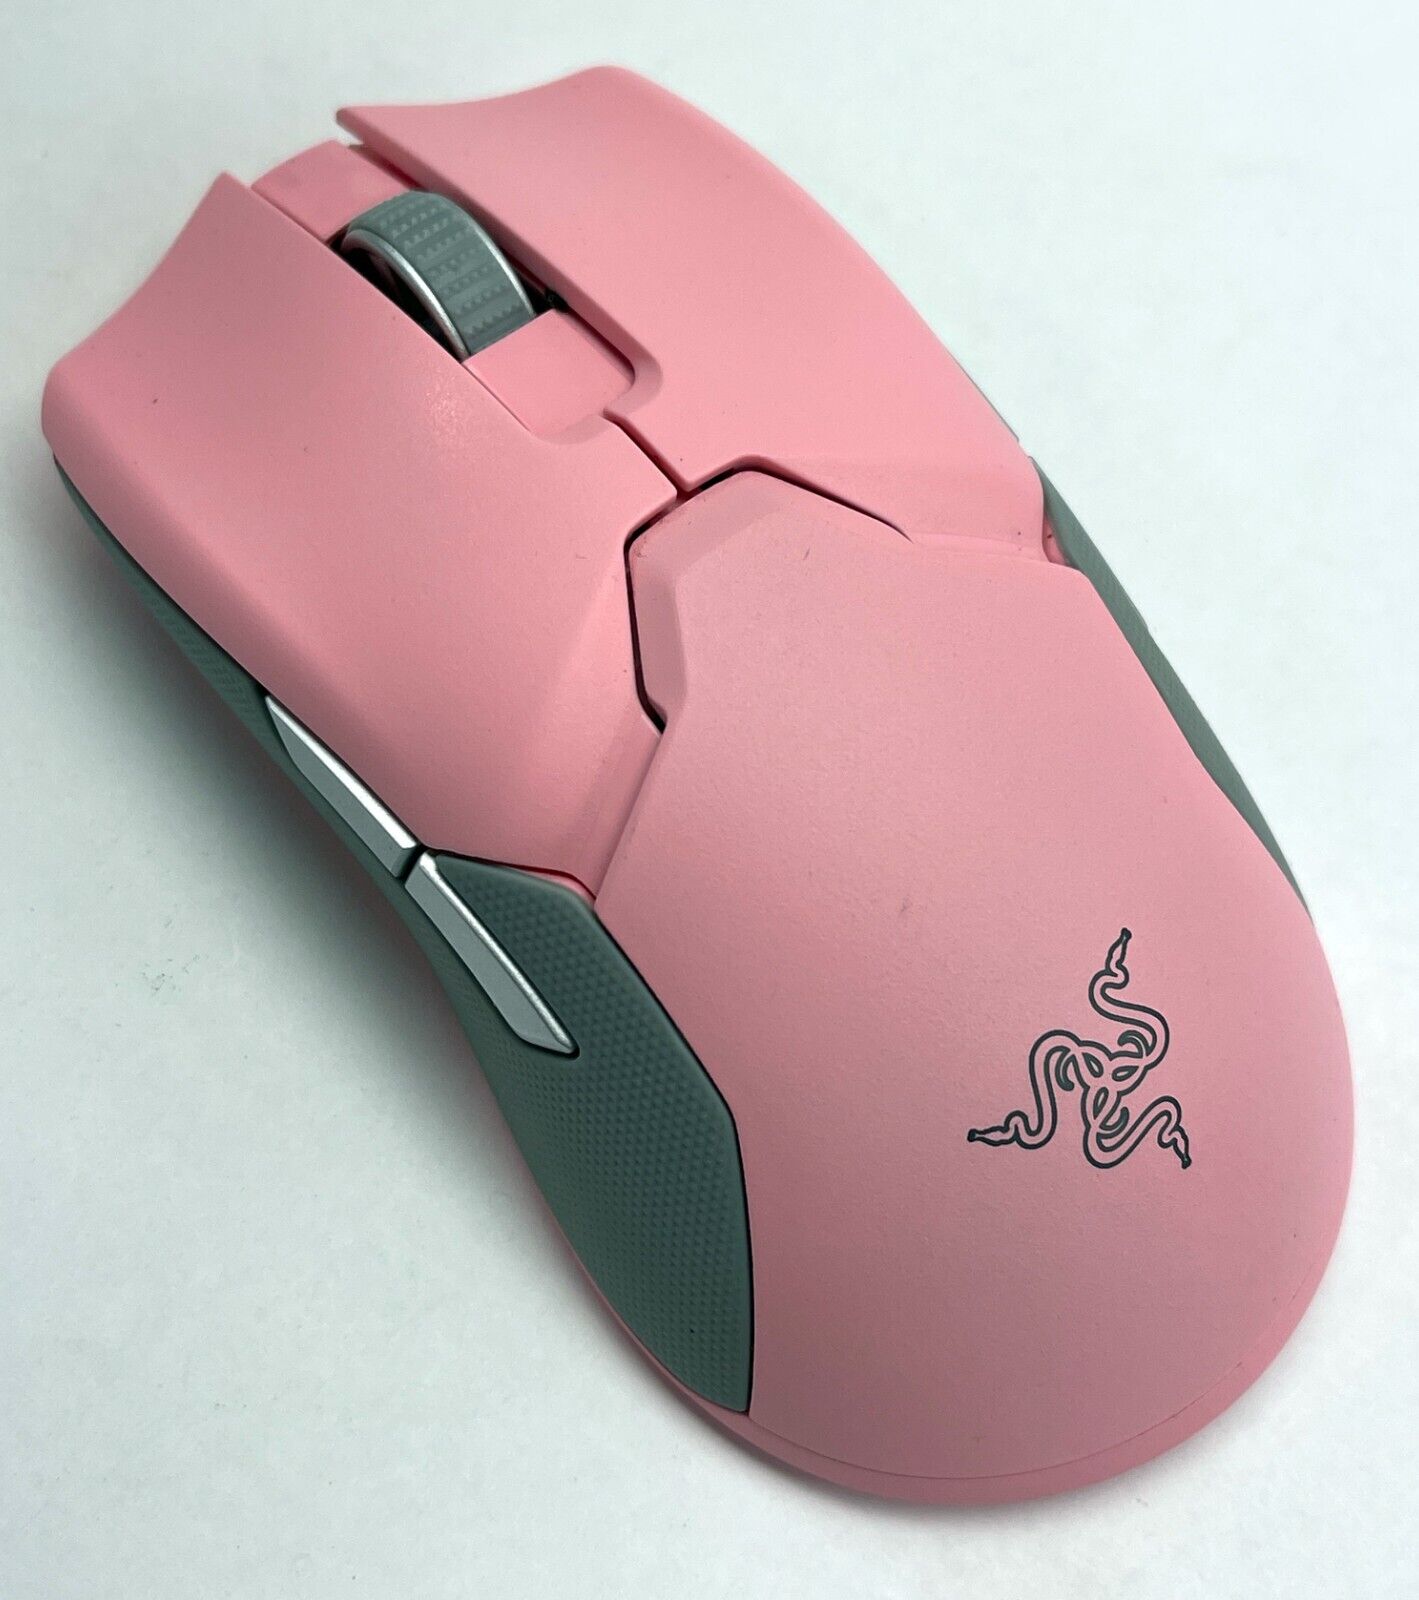 Razer Viper Ultimate RC 30-030501 Wireless Gaming Mouse Pink With USB Dongle